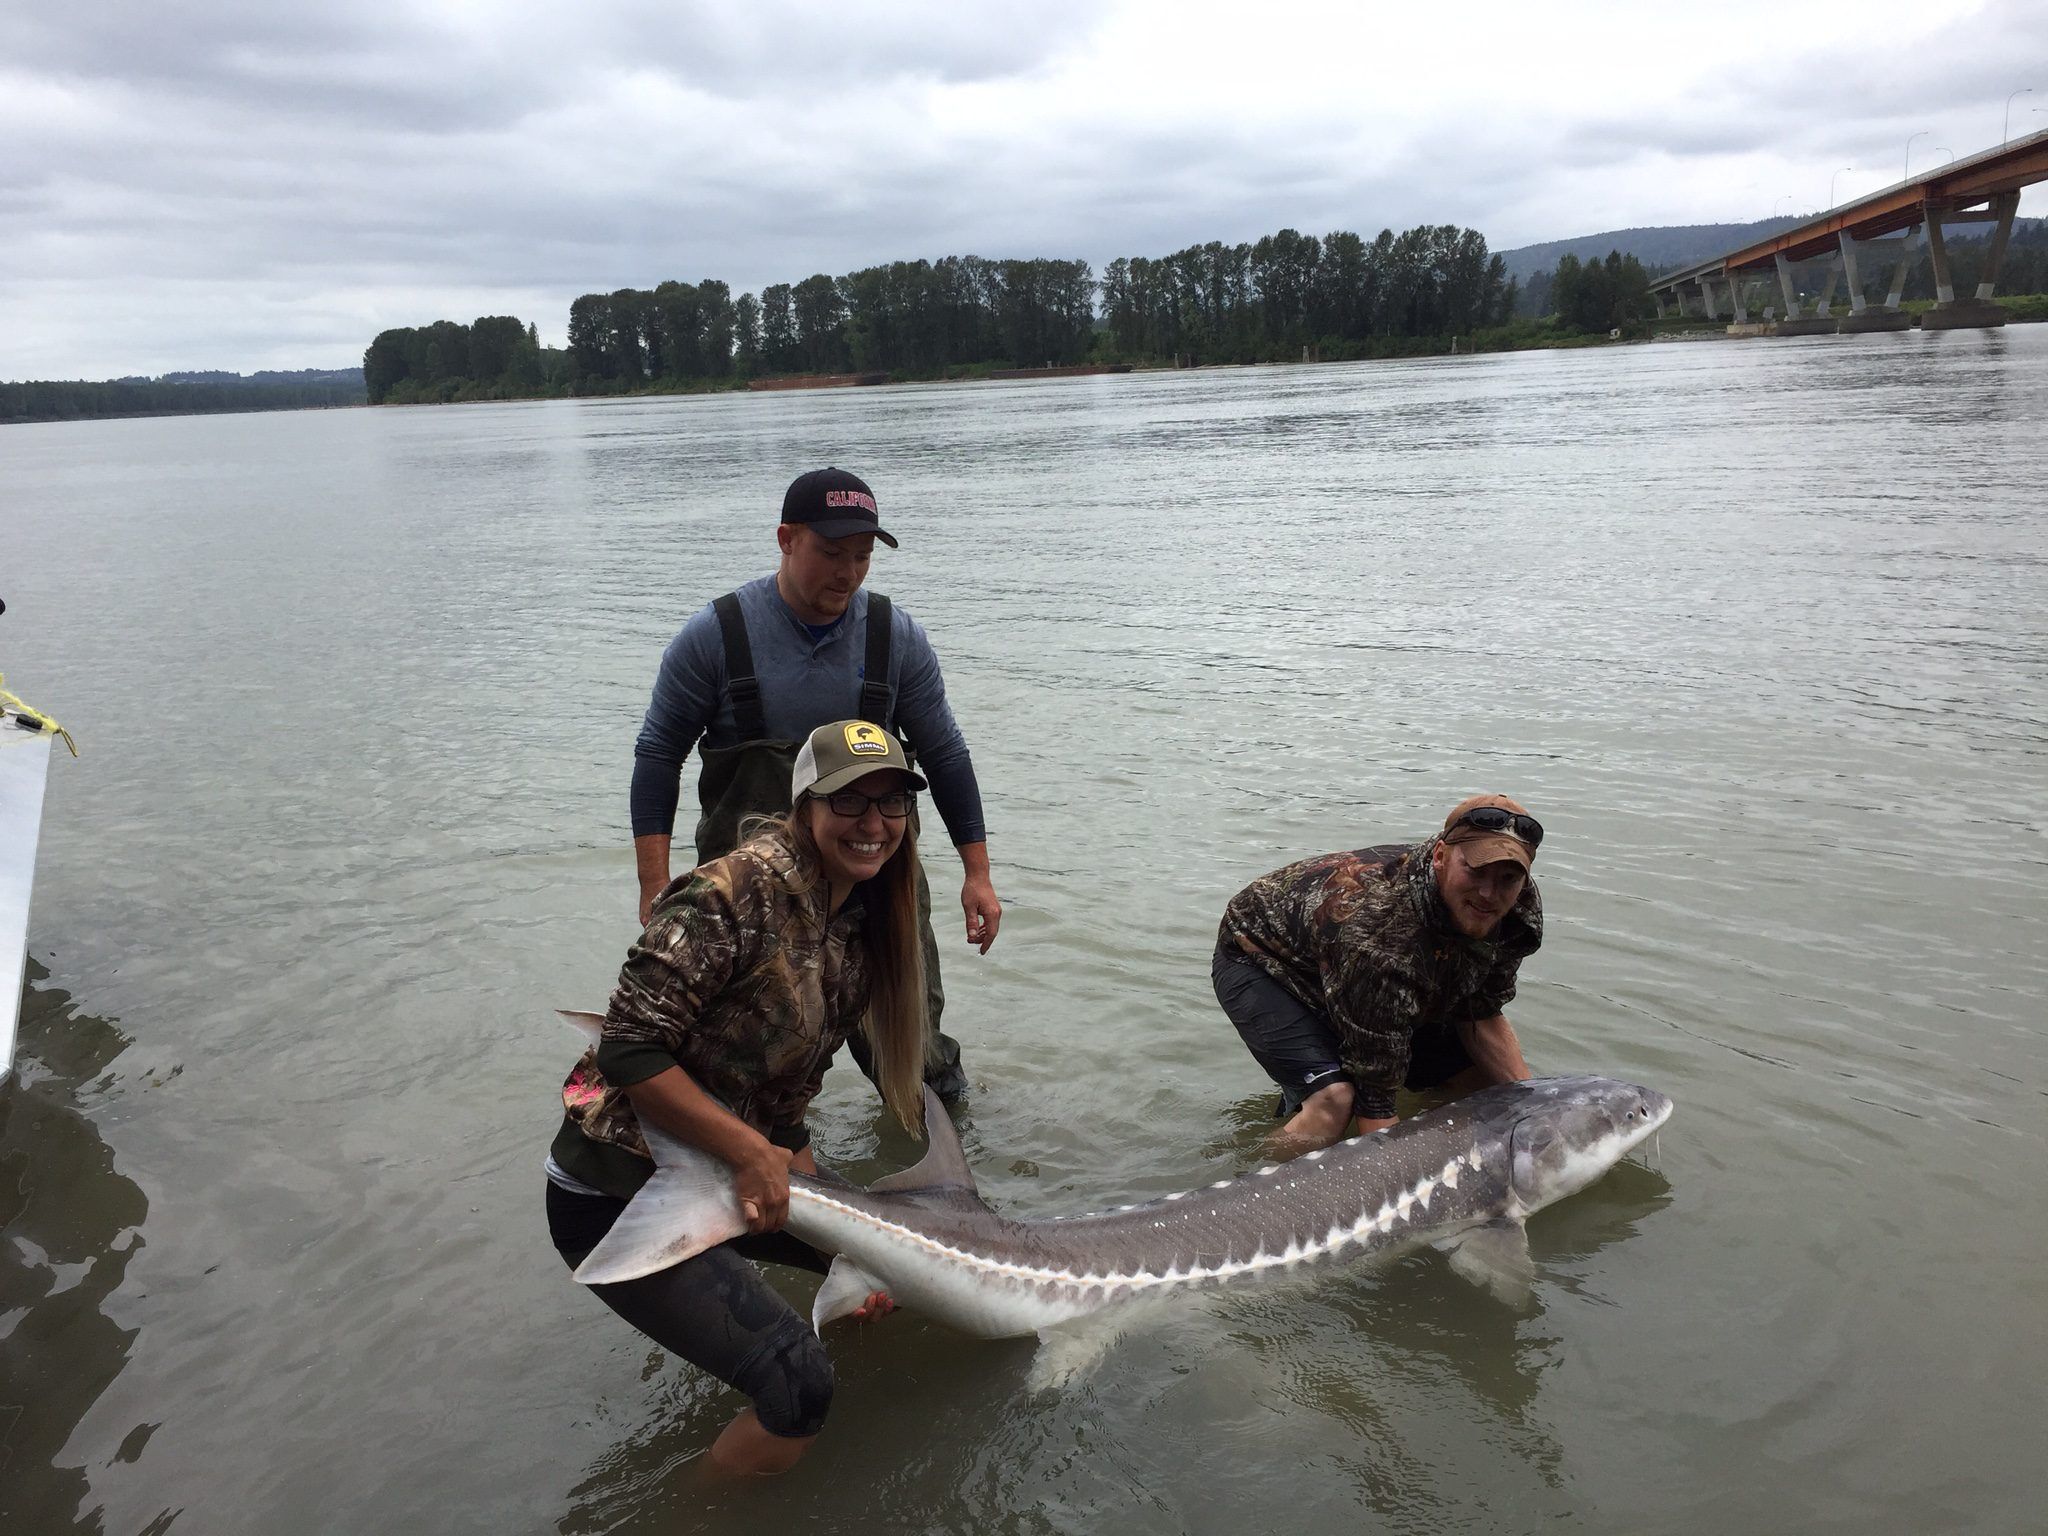 Angling for Sturgeon in Canadian waters - The Fishing Website